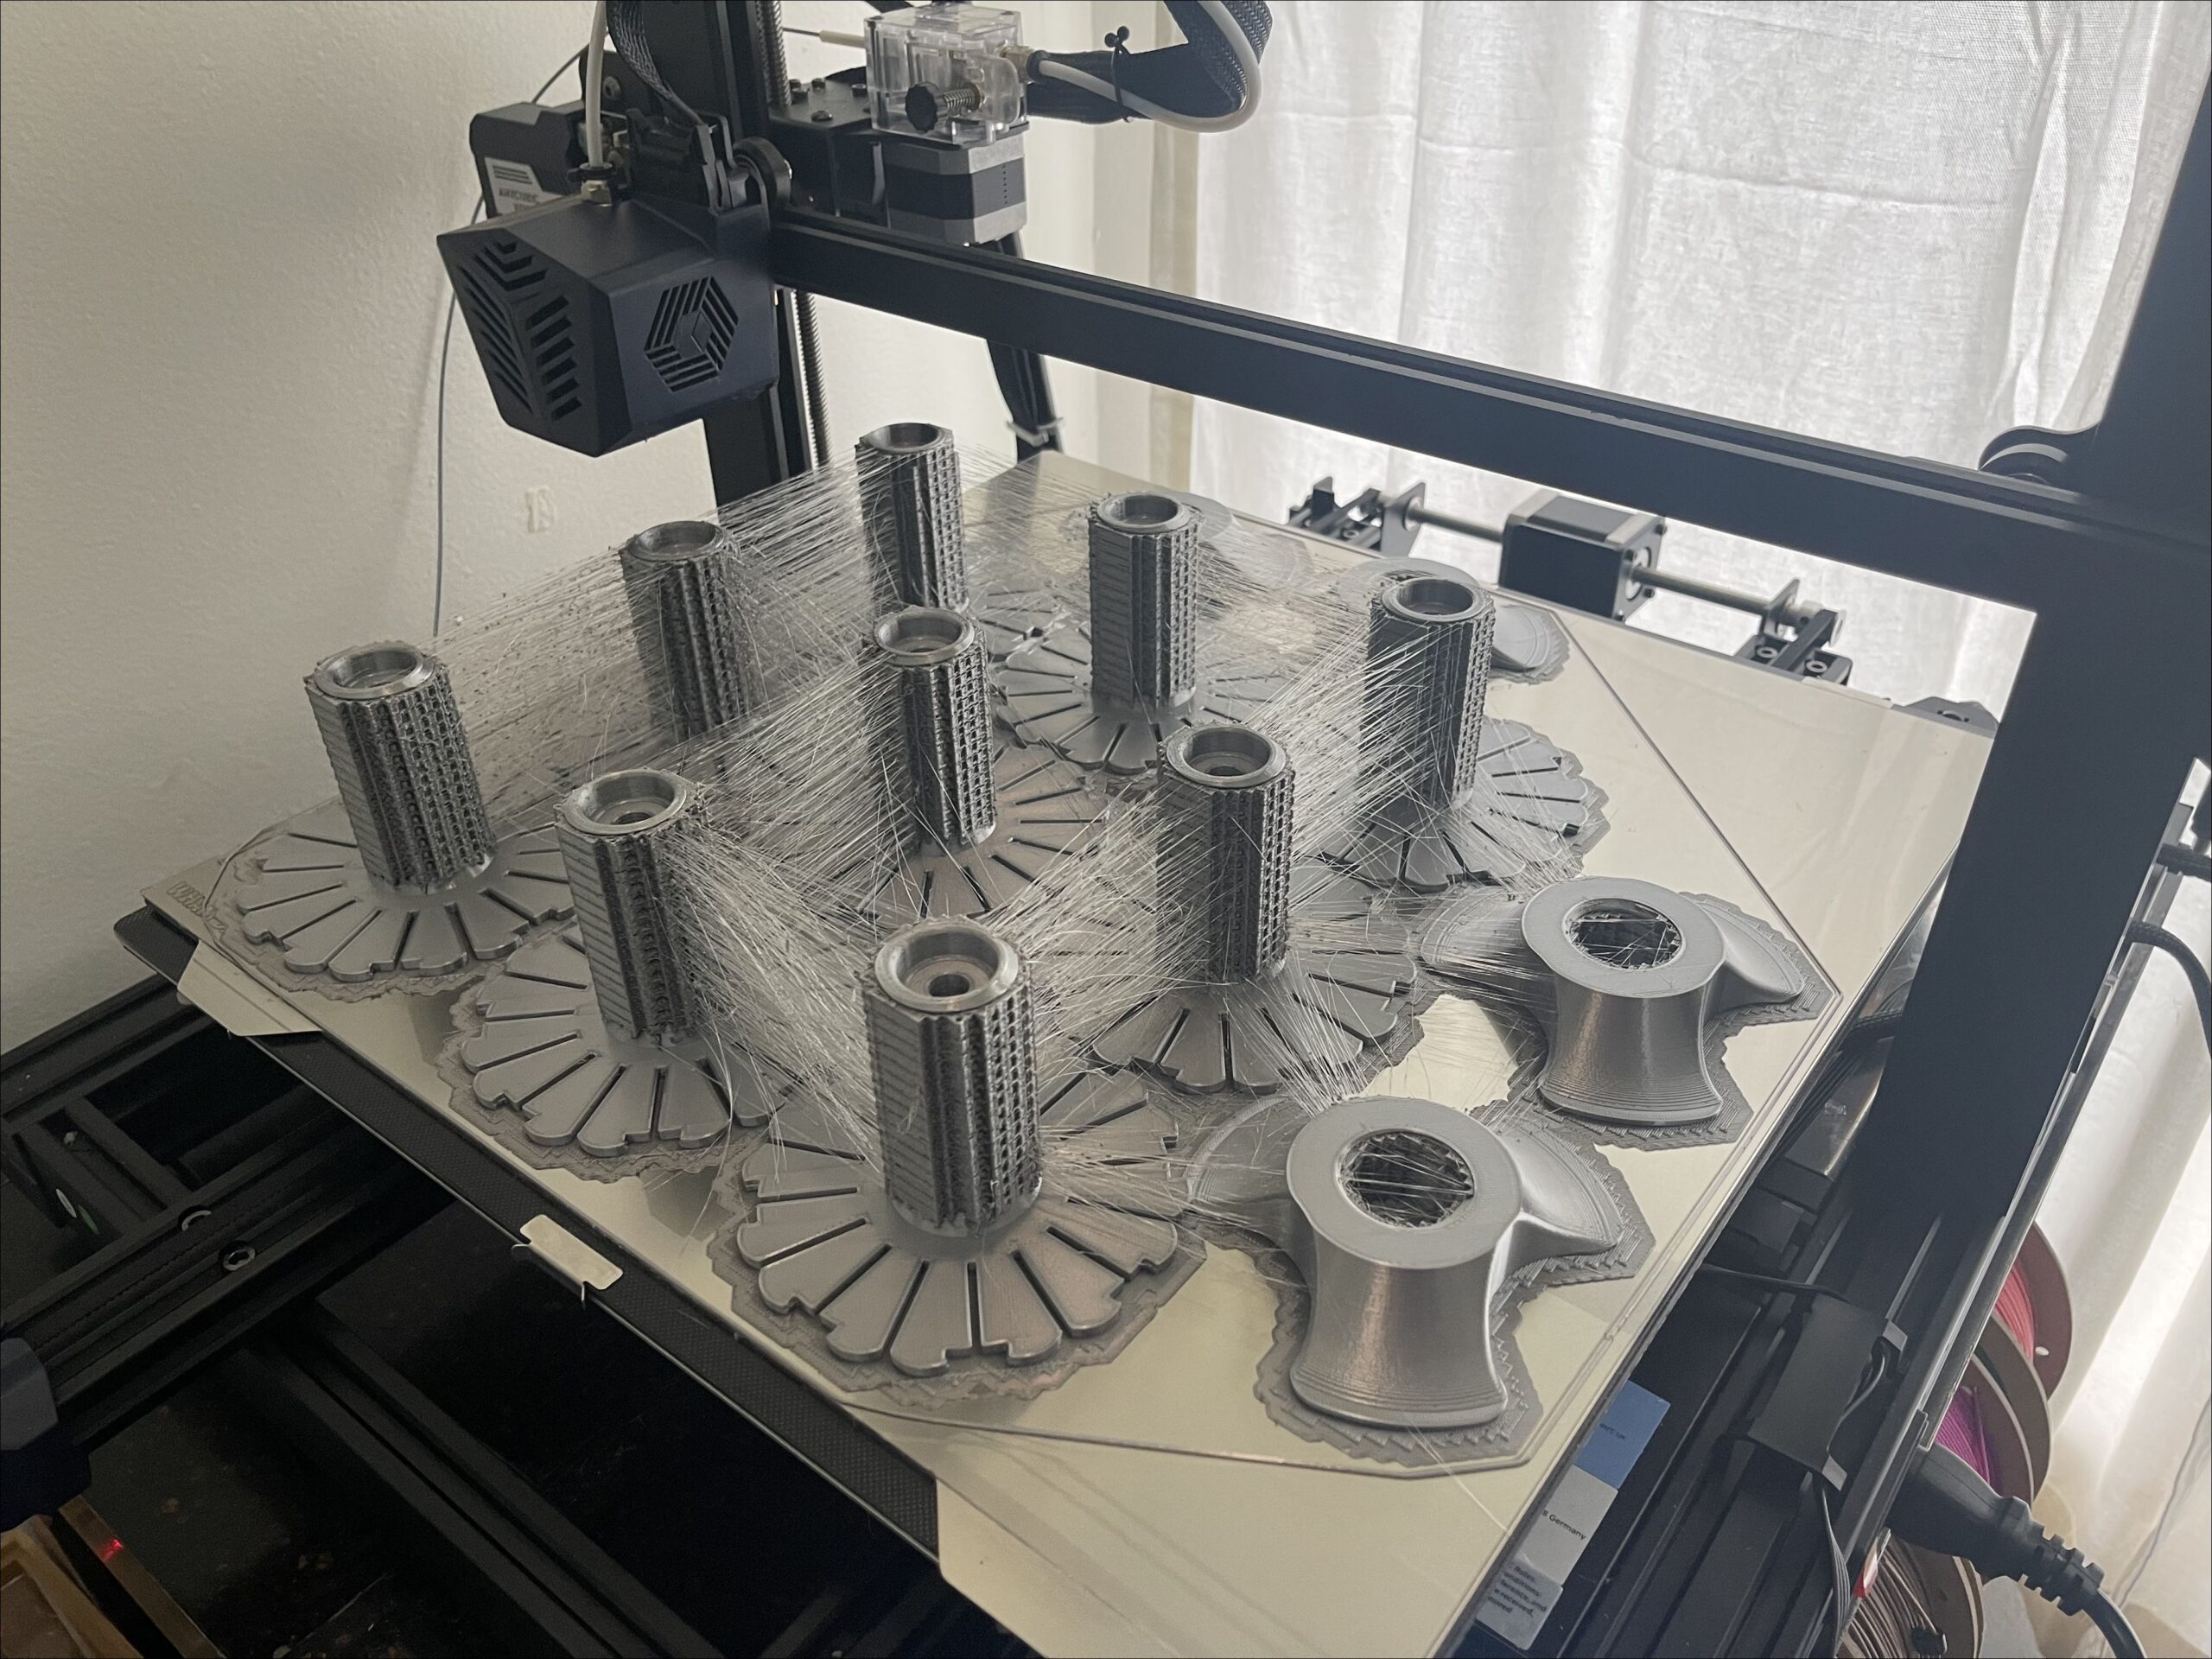 Slicing models for the new Anycubic Kobra Max? – PrusaSlicer